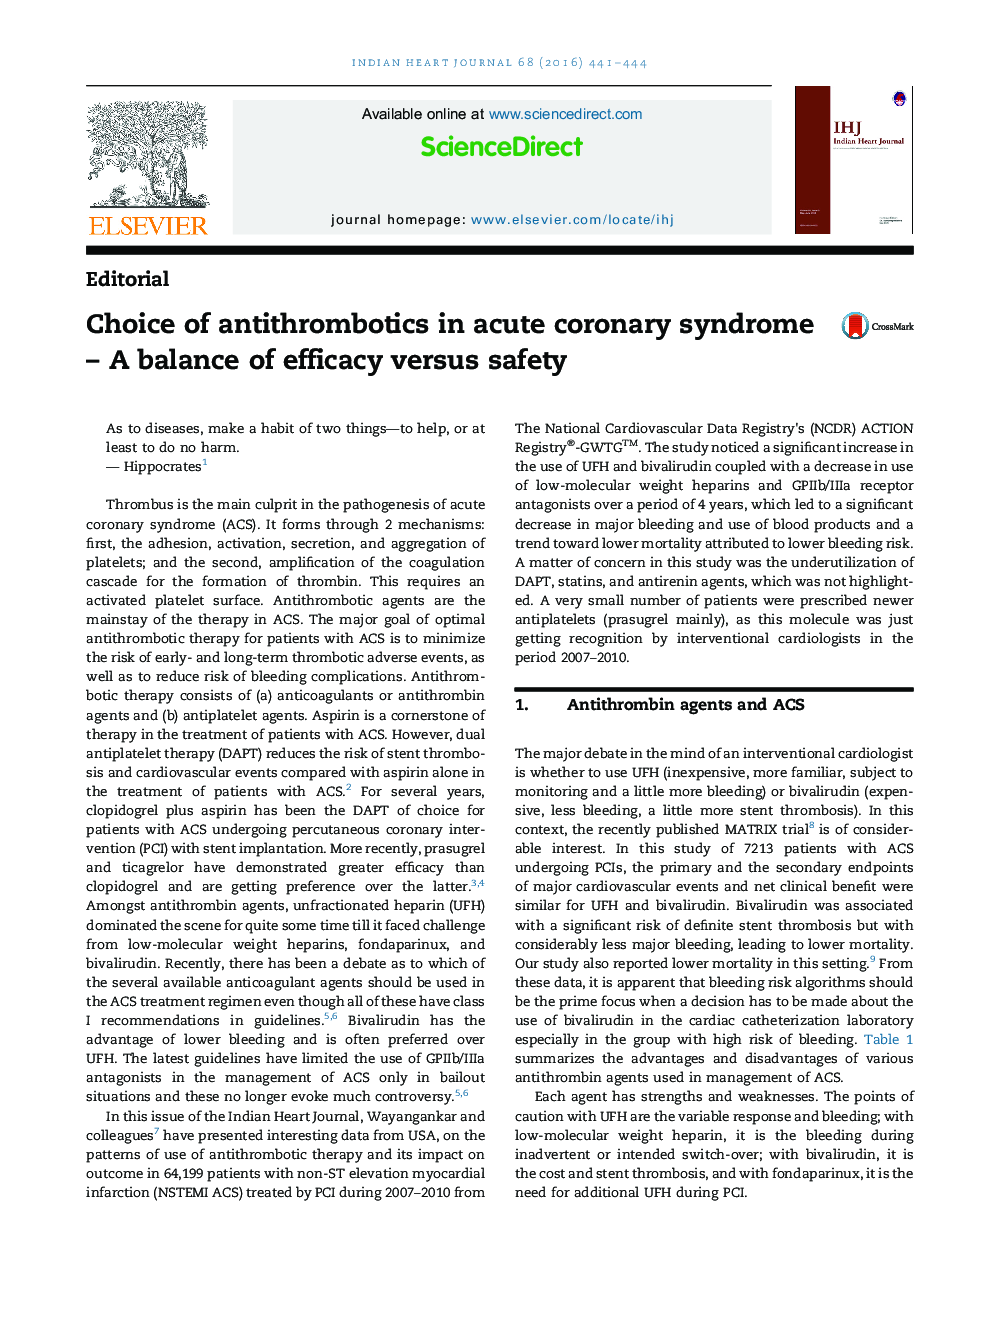 Choice of antithrombotics in acute coronary syndrome - A balance of efficacy versus safety